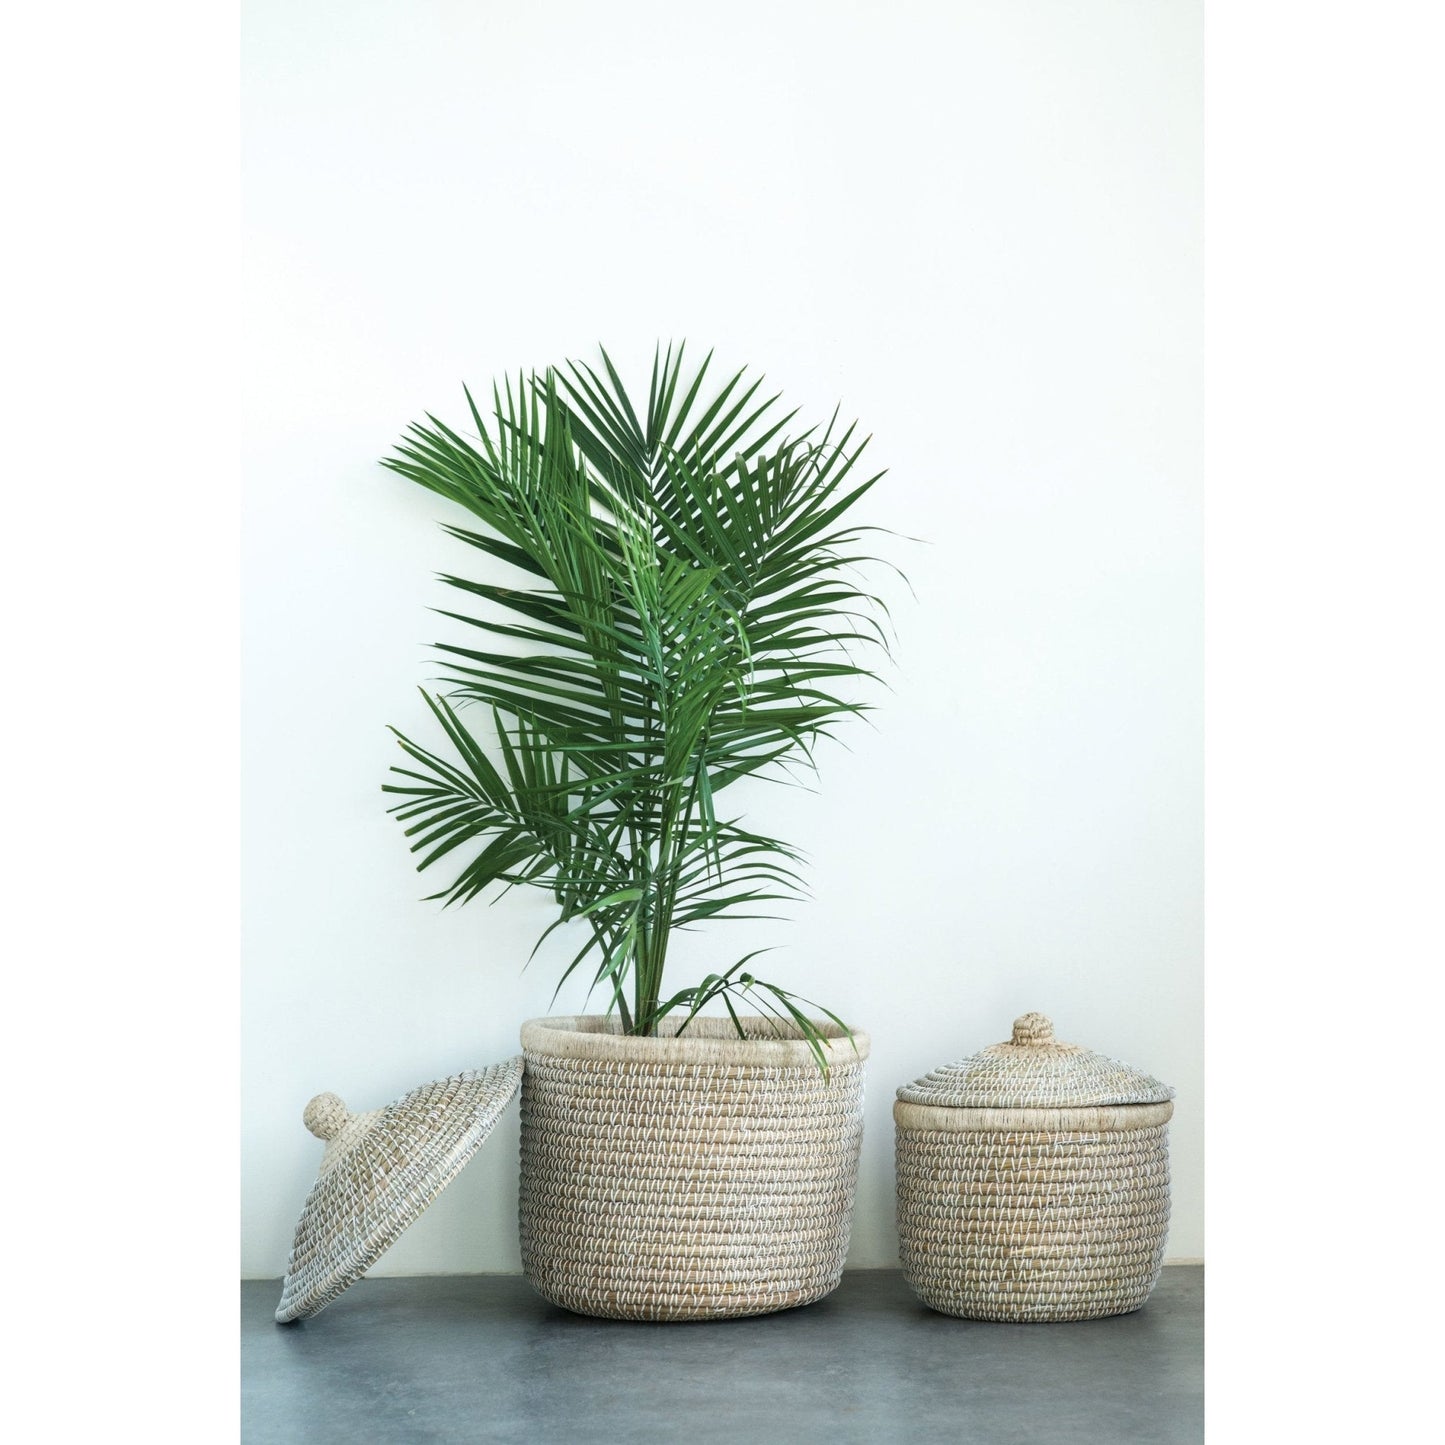 Seagrass Basket with Lid - Curated Home Decor